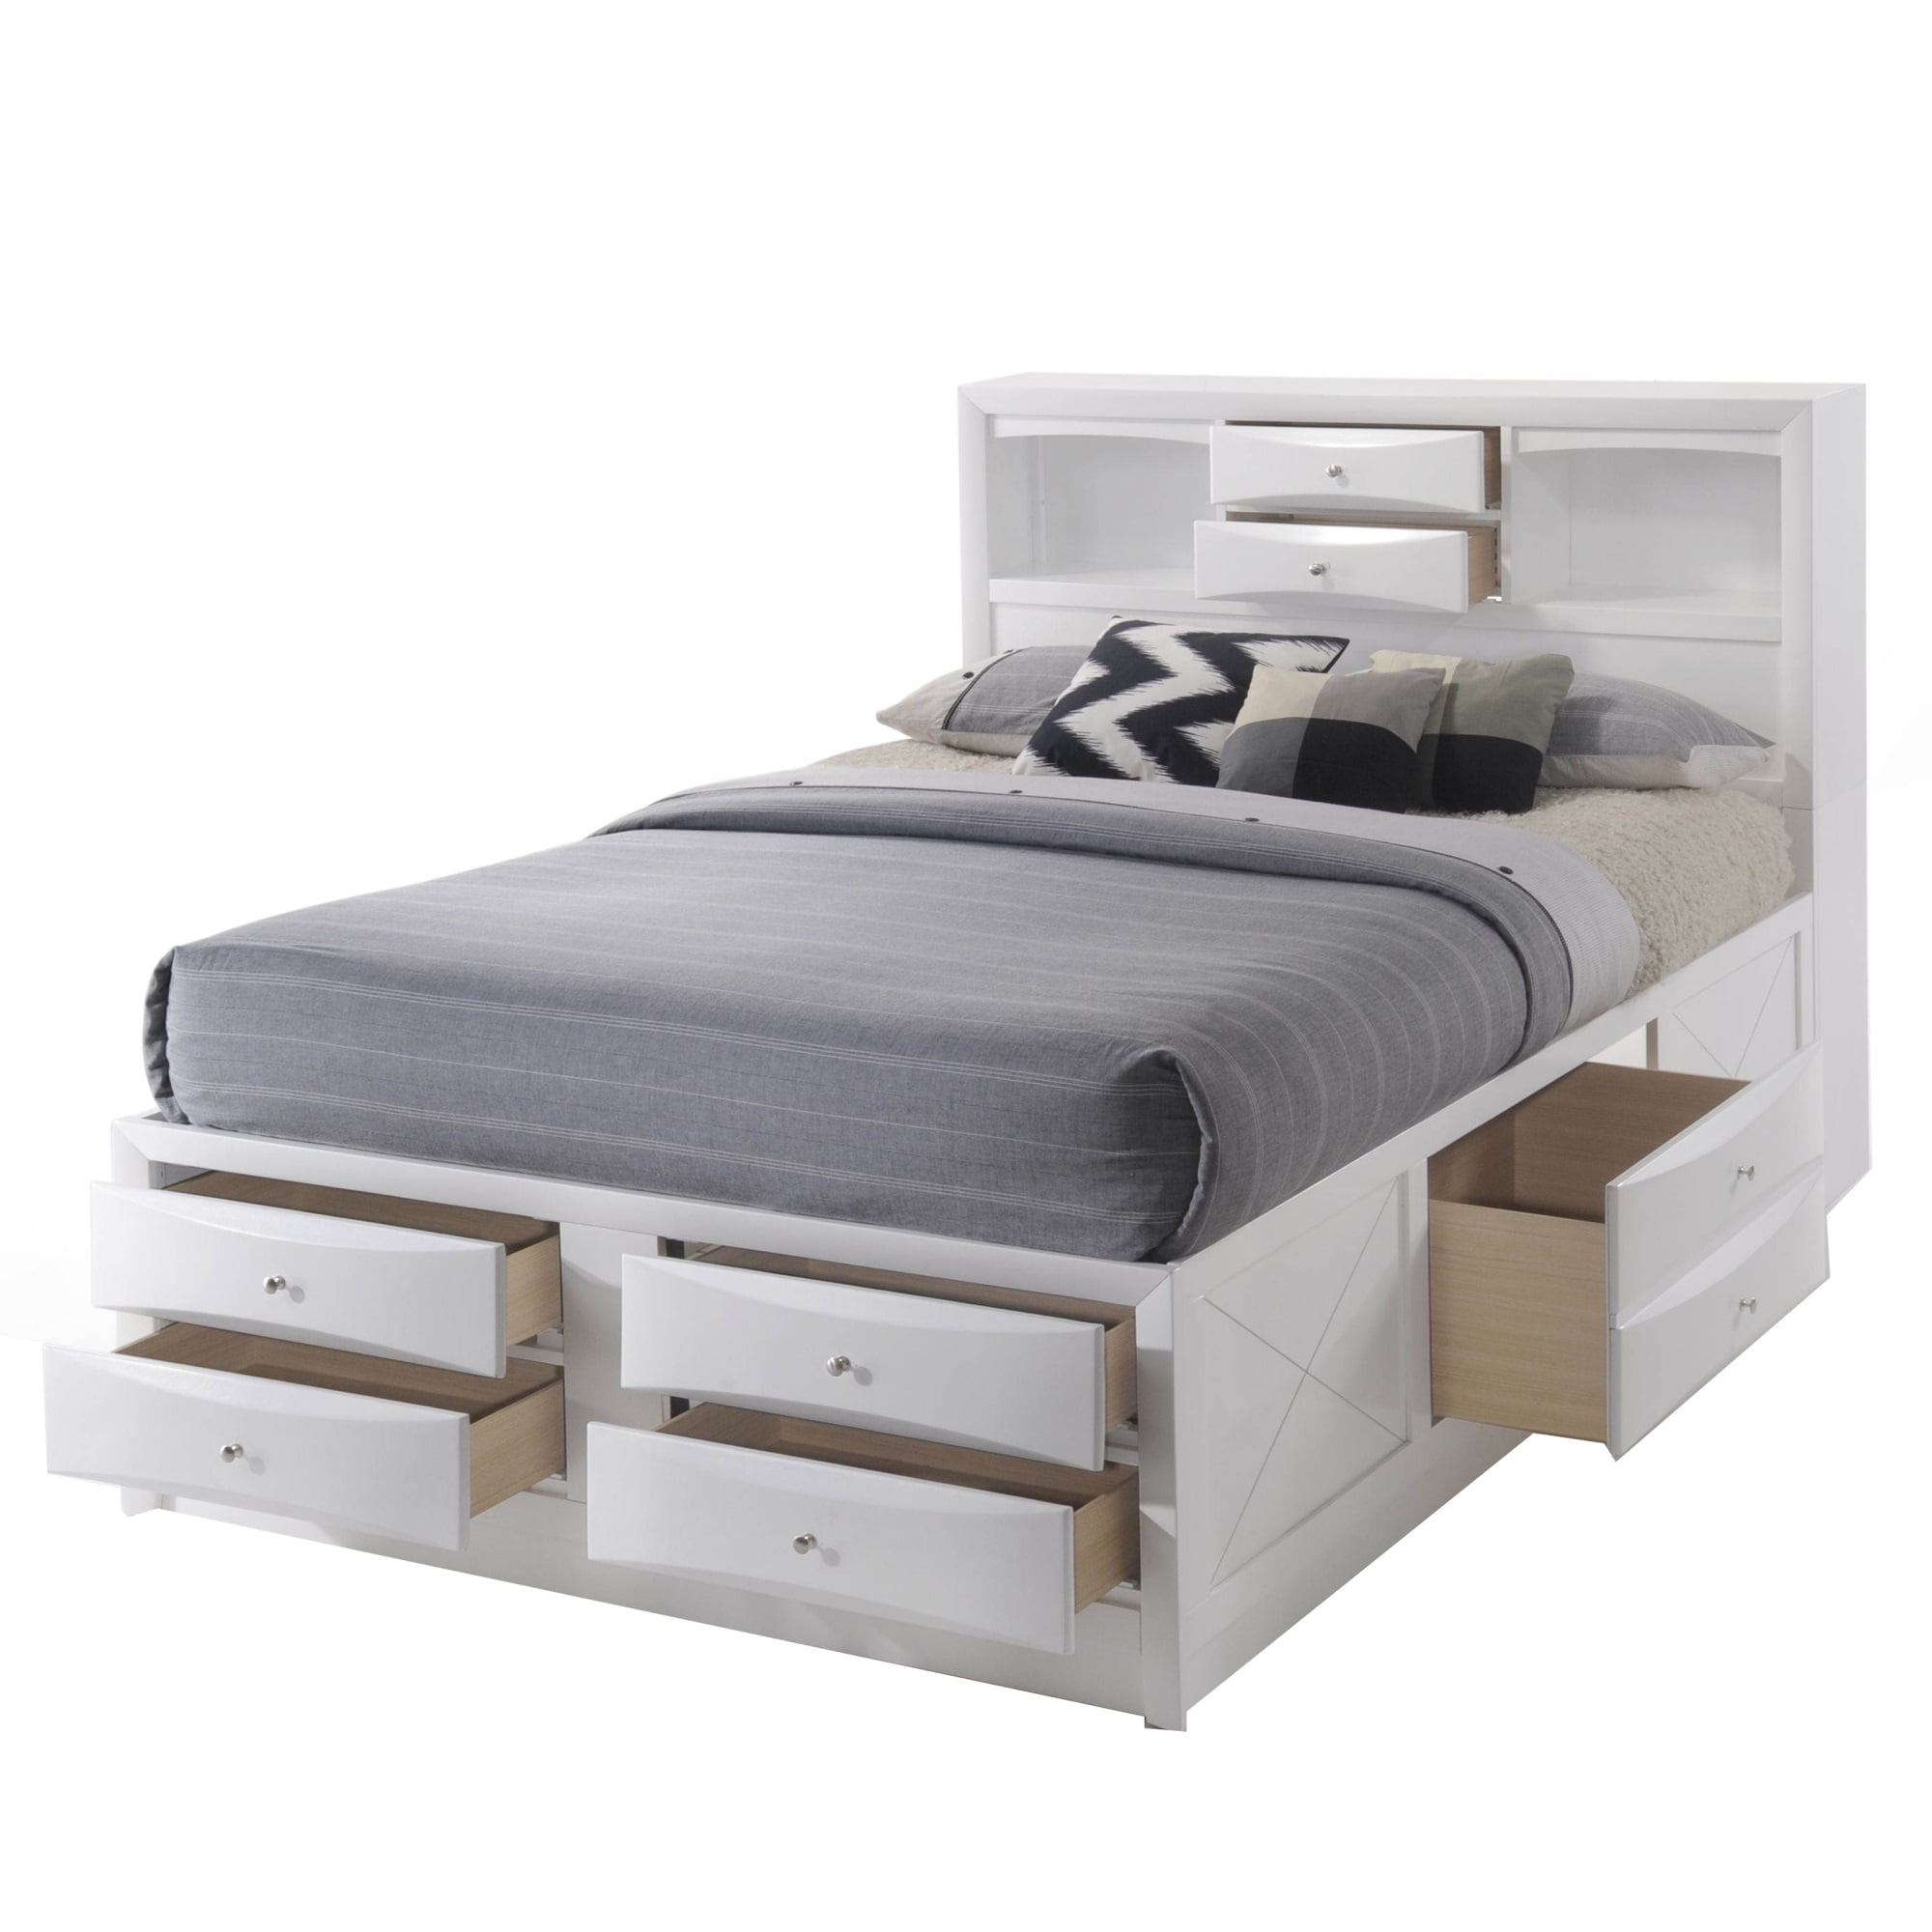 Eight Drawer Full Size Storage Bed With, Queen Size Bedroom Set With Bookcase Headboard